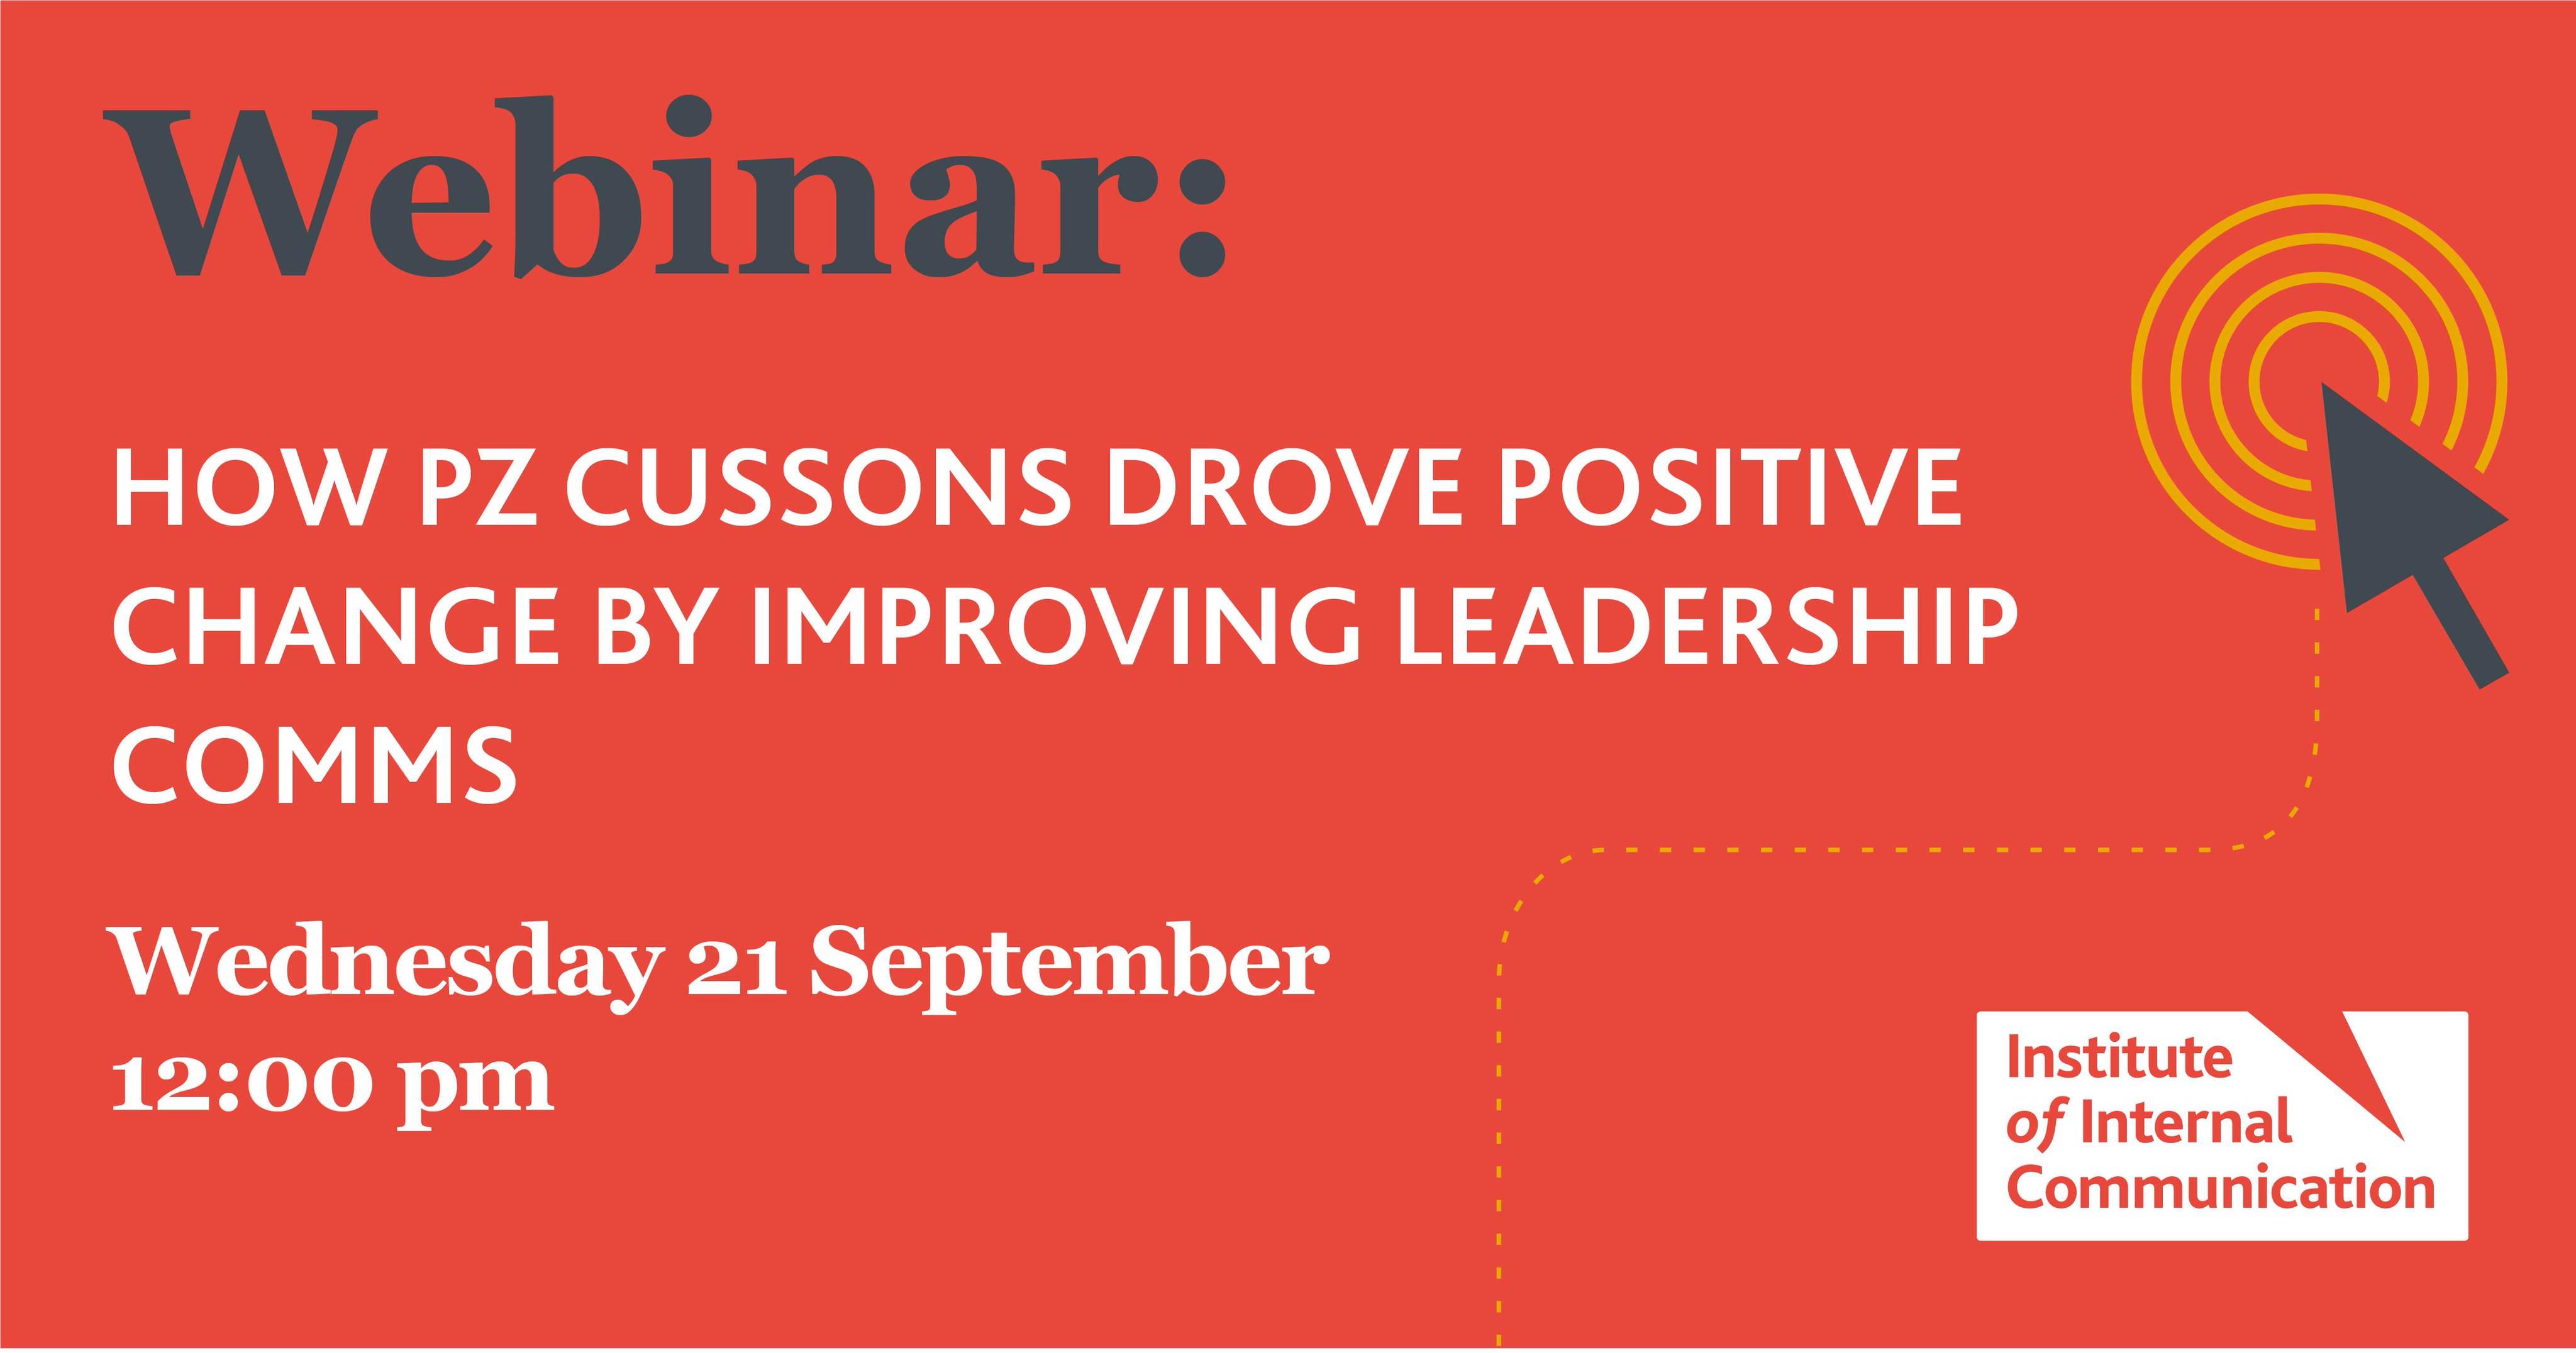 IoIC webinar on leadership comms with PZ Cussons and employee engagement agency Sequel Group